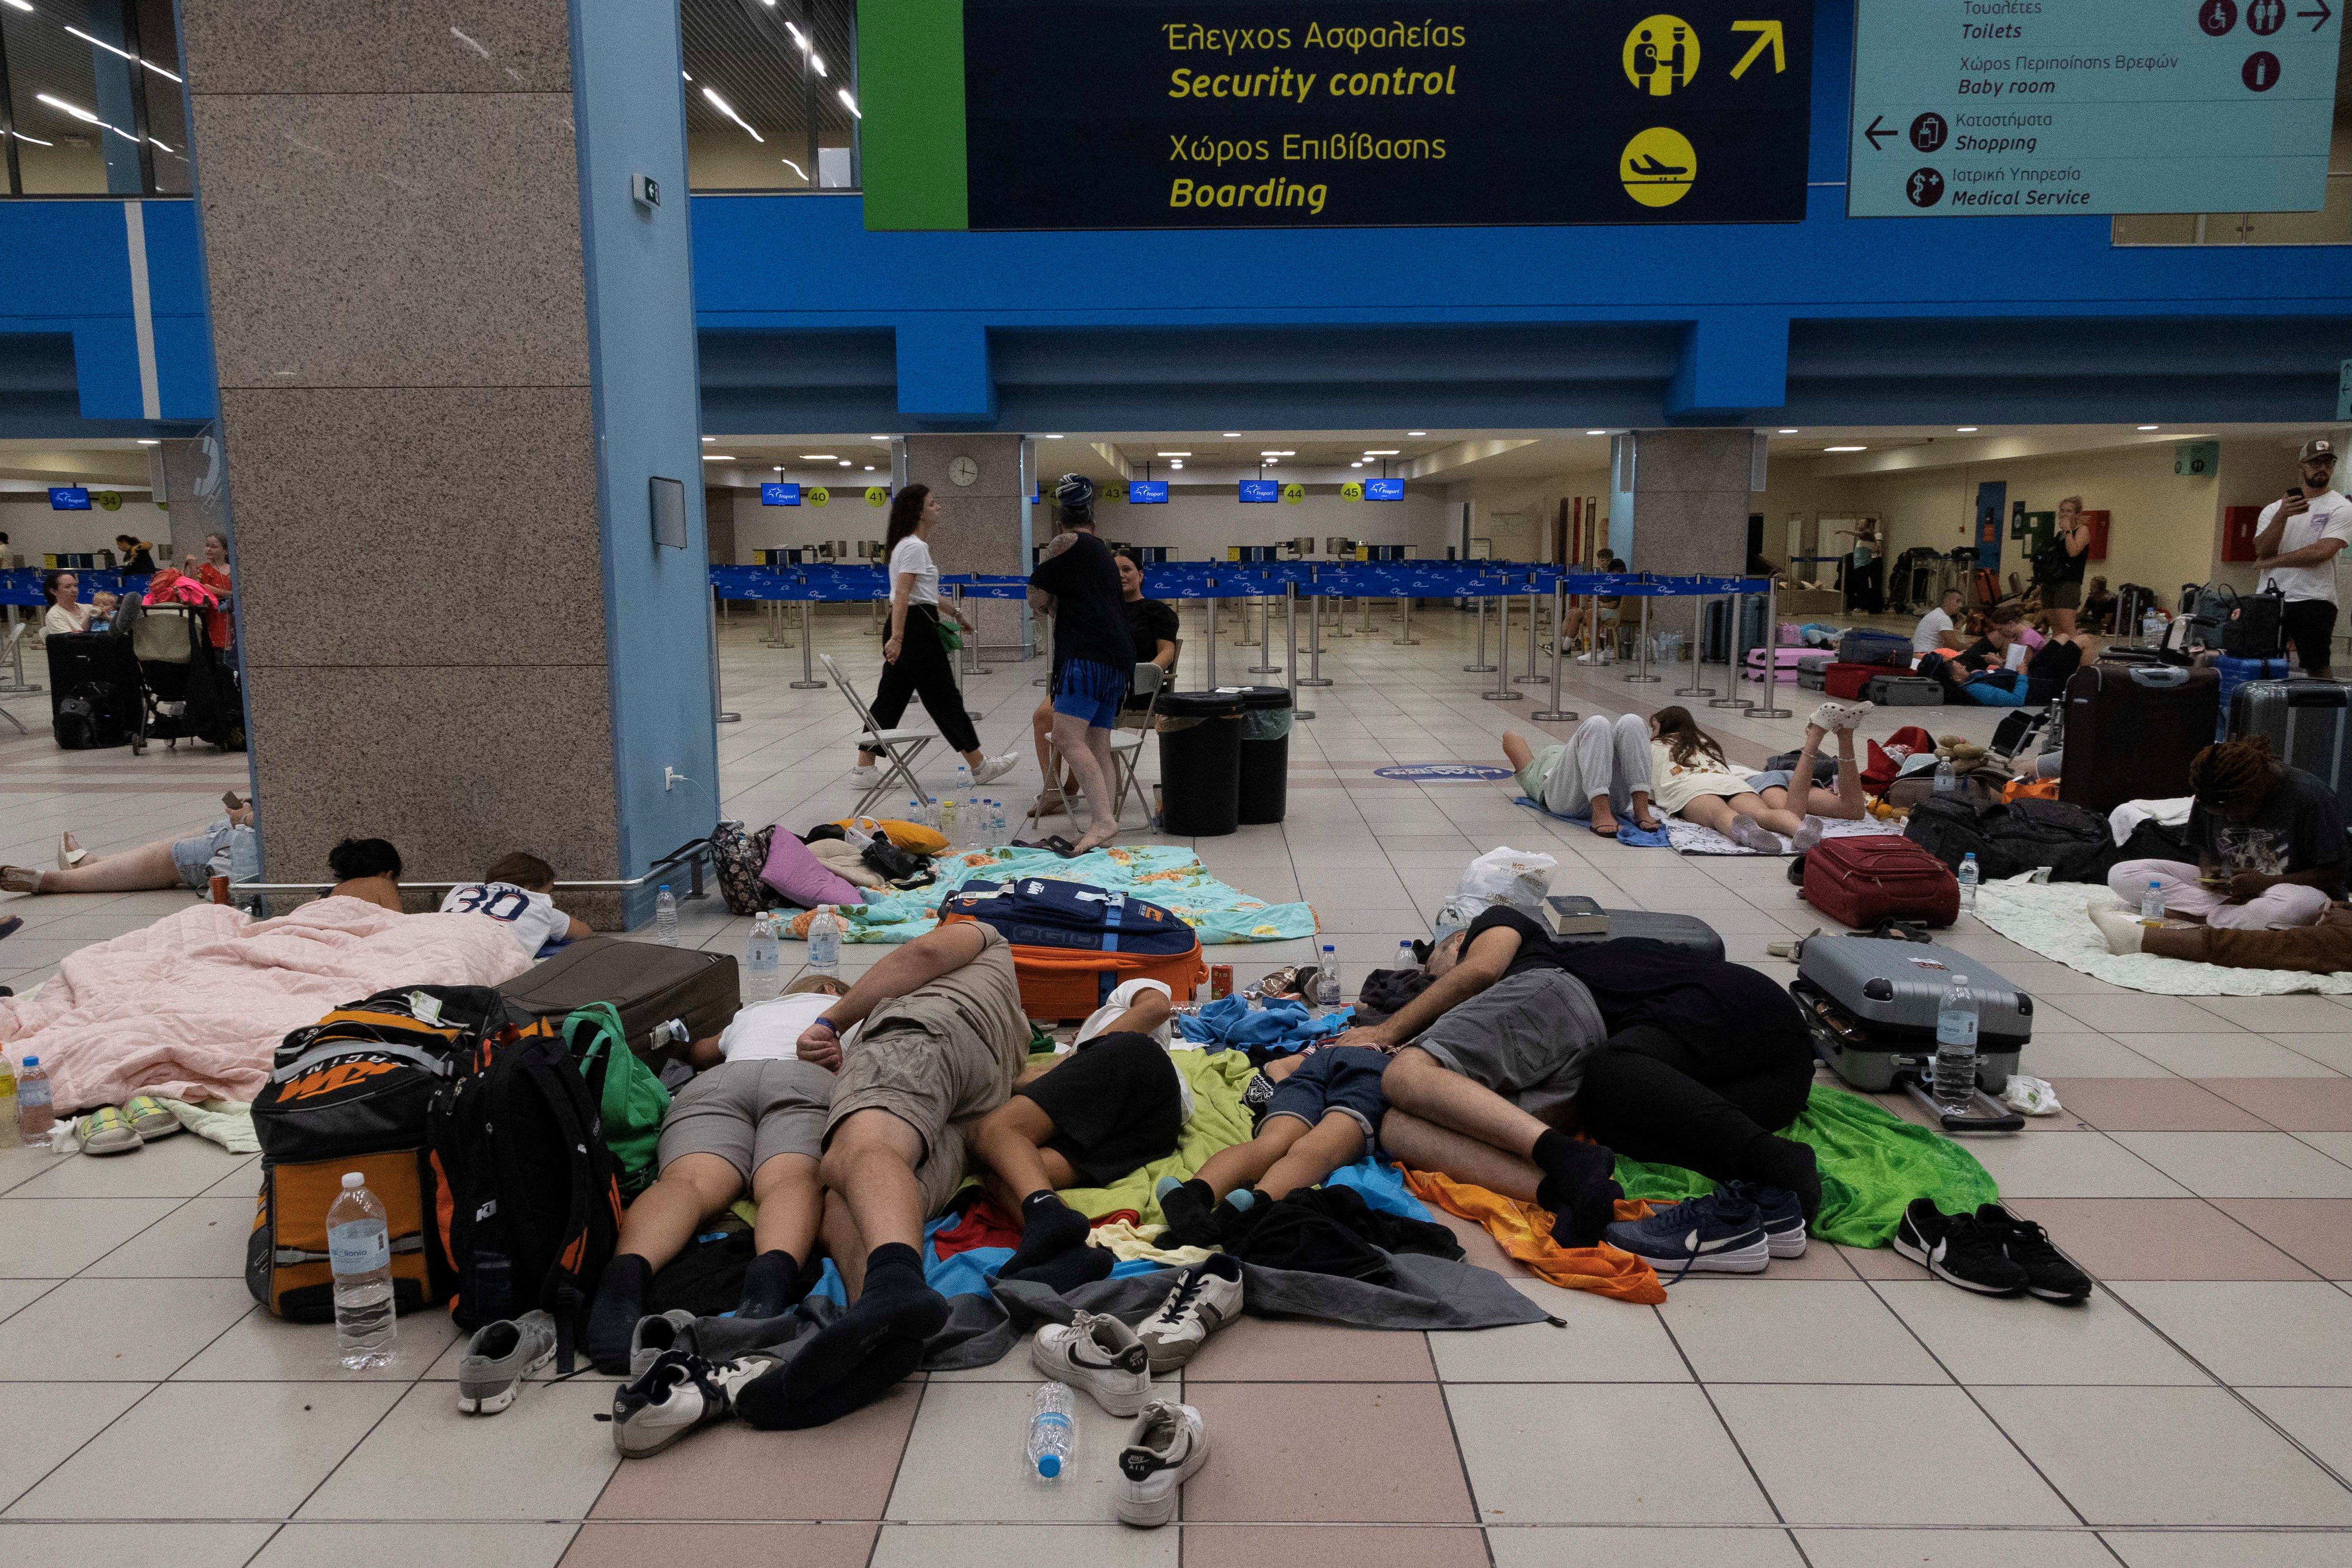 Tourists sleep as they wait for departing planes at the airport, after being evacuated following a wildfire on Rhodes